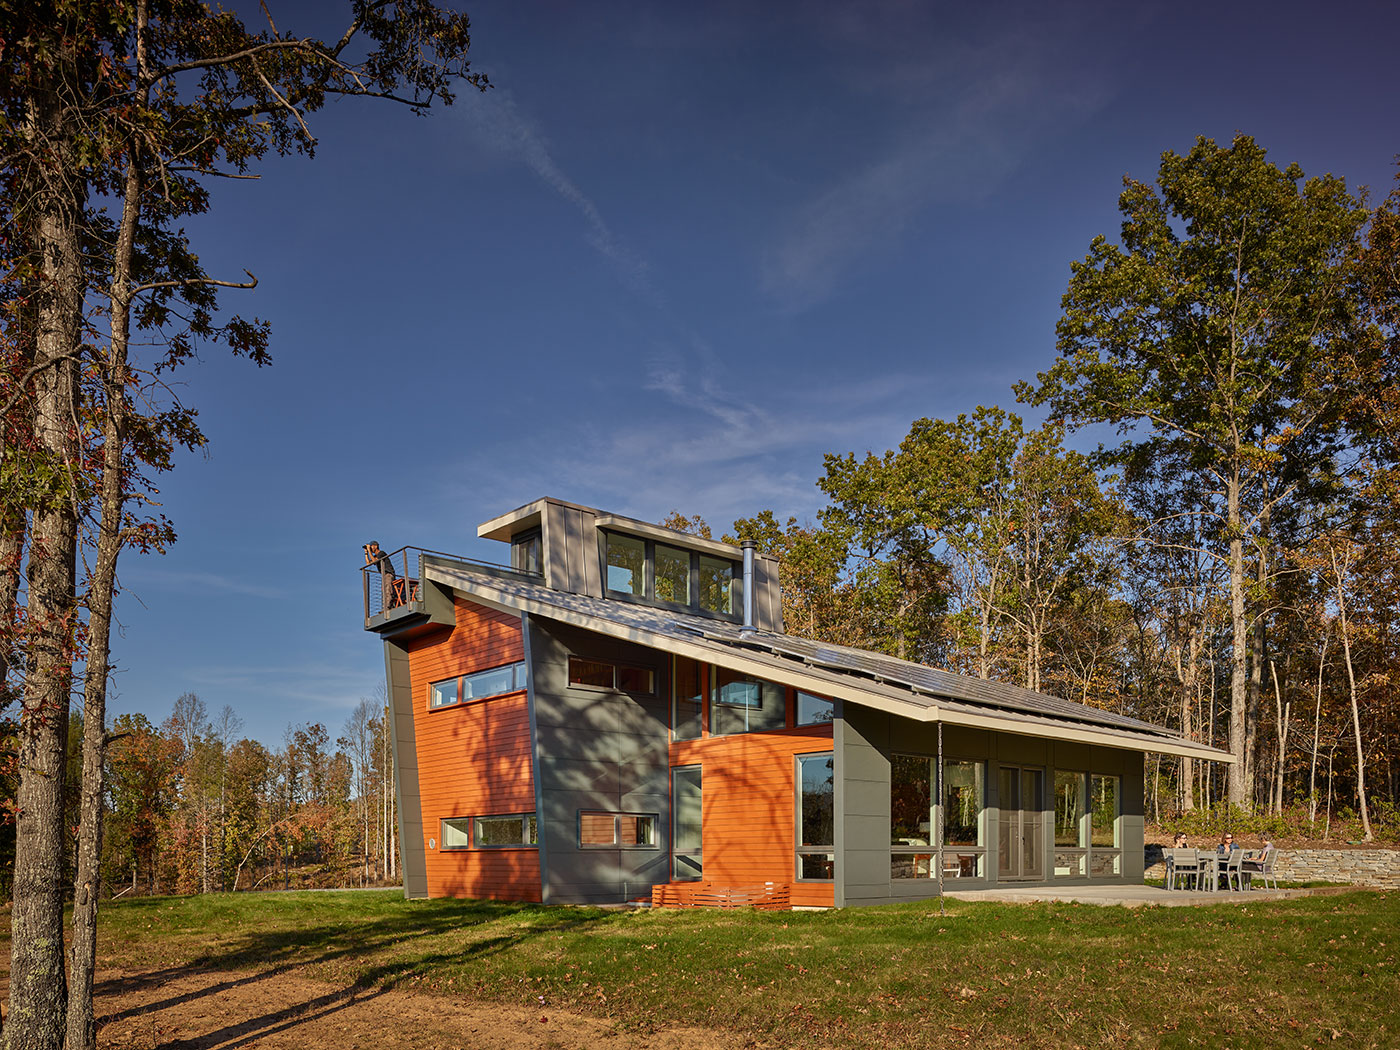 Charlottesville Net Zero Home With South-Facing Solar Panel Roof, Trapezoidal Windows, Wood, Hardipanel Siding and Carport by Virginia Residential Architect HEDS.